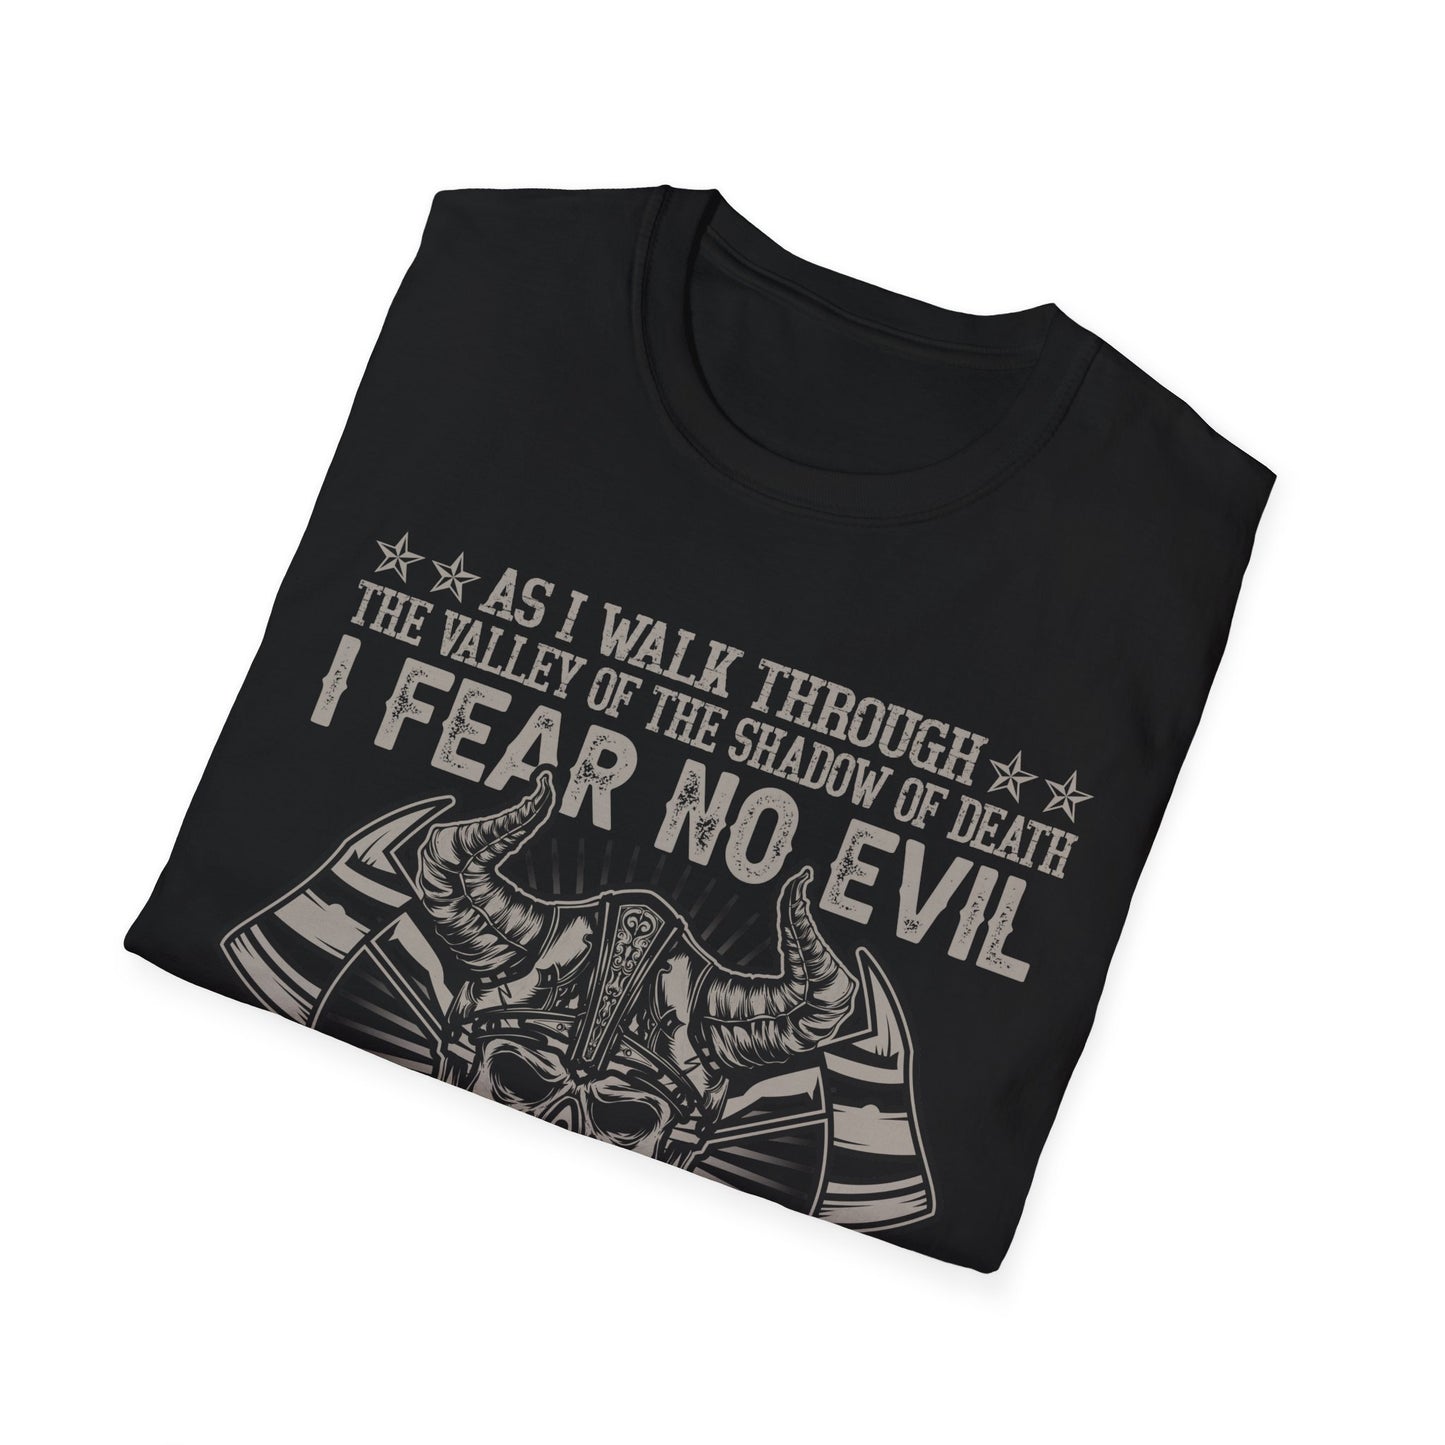 As I Walk Through The Valley Of The Shadow Of Death I Fear No Evil For I Am The Baddest One In The Valley T-Shirt